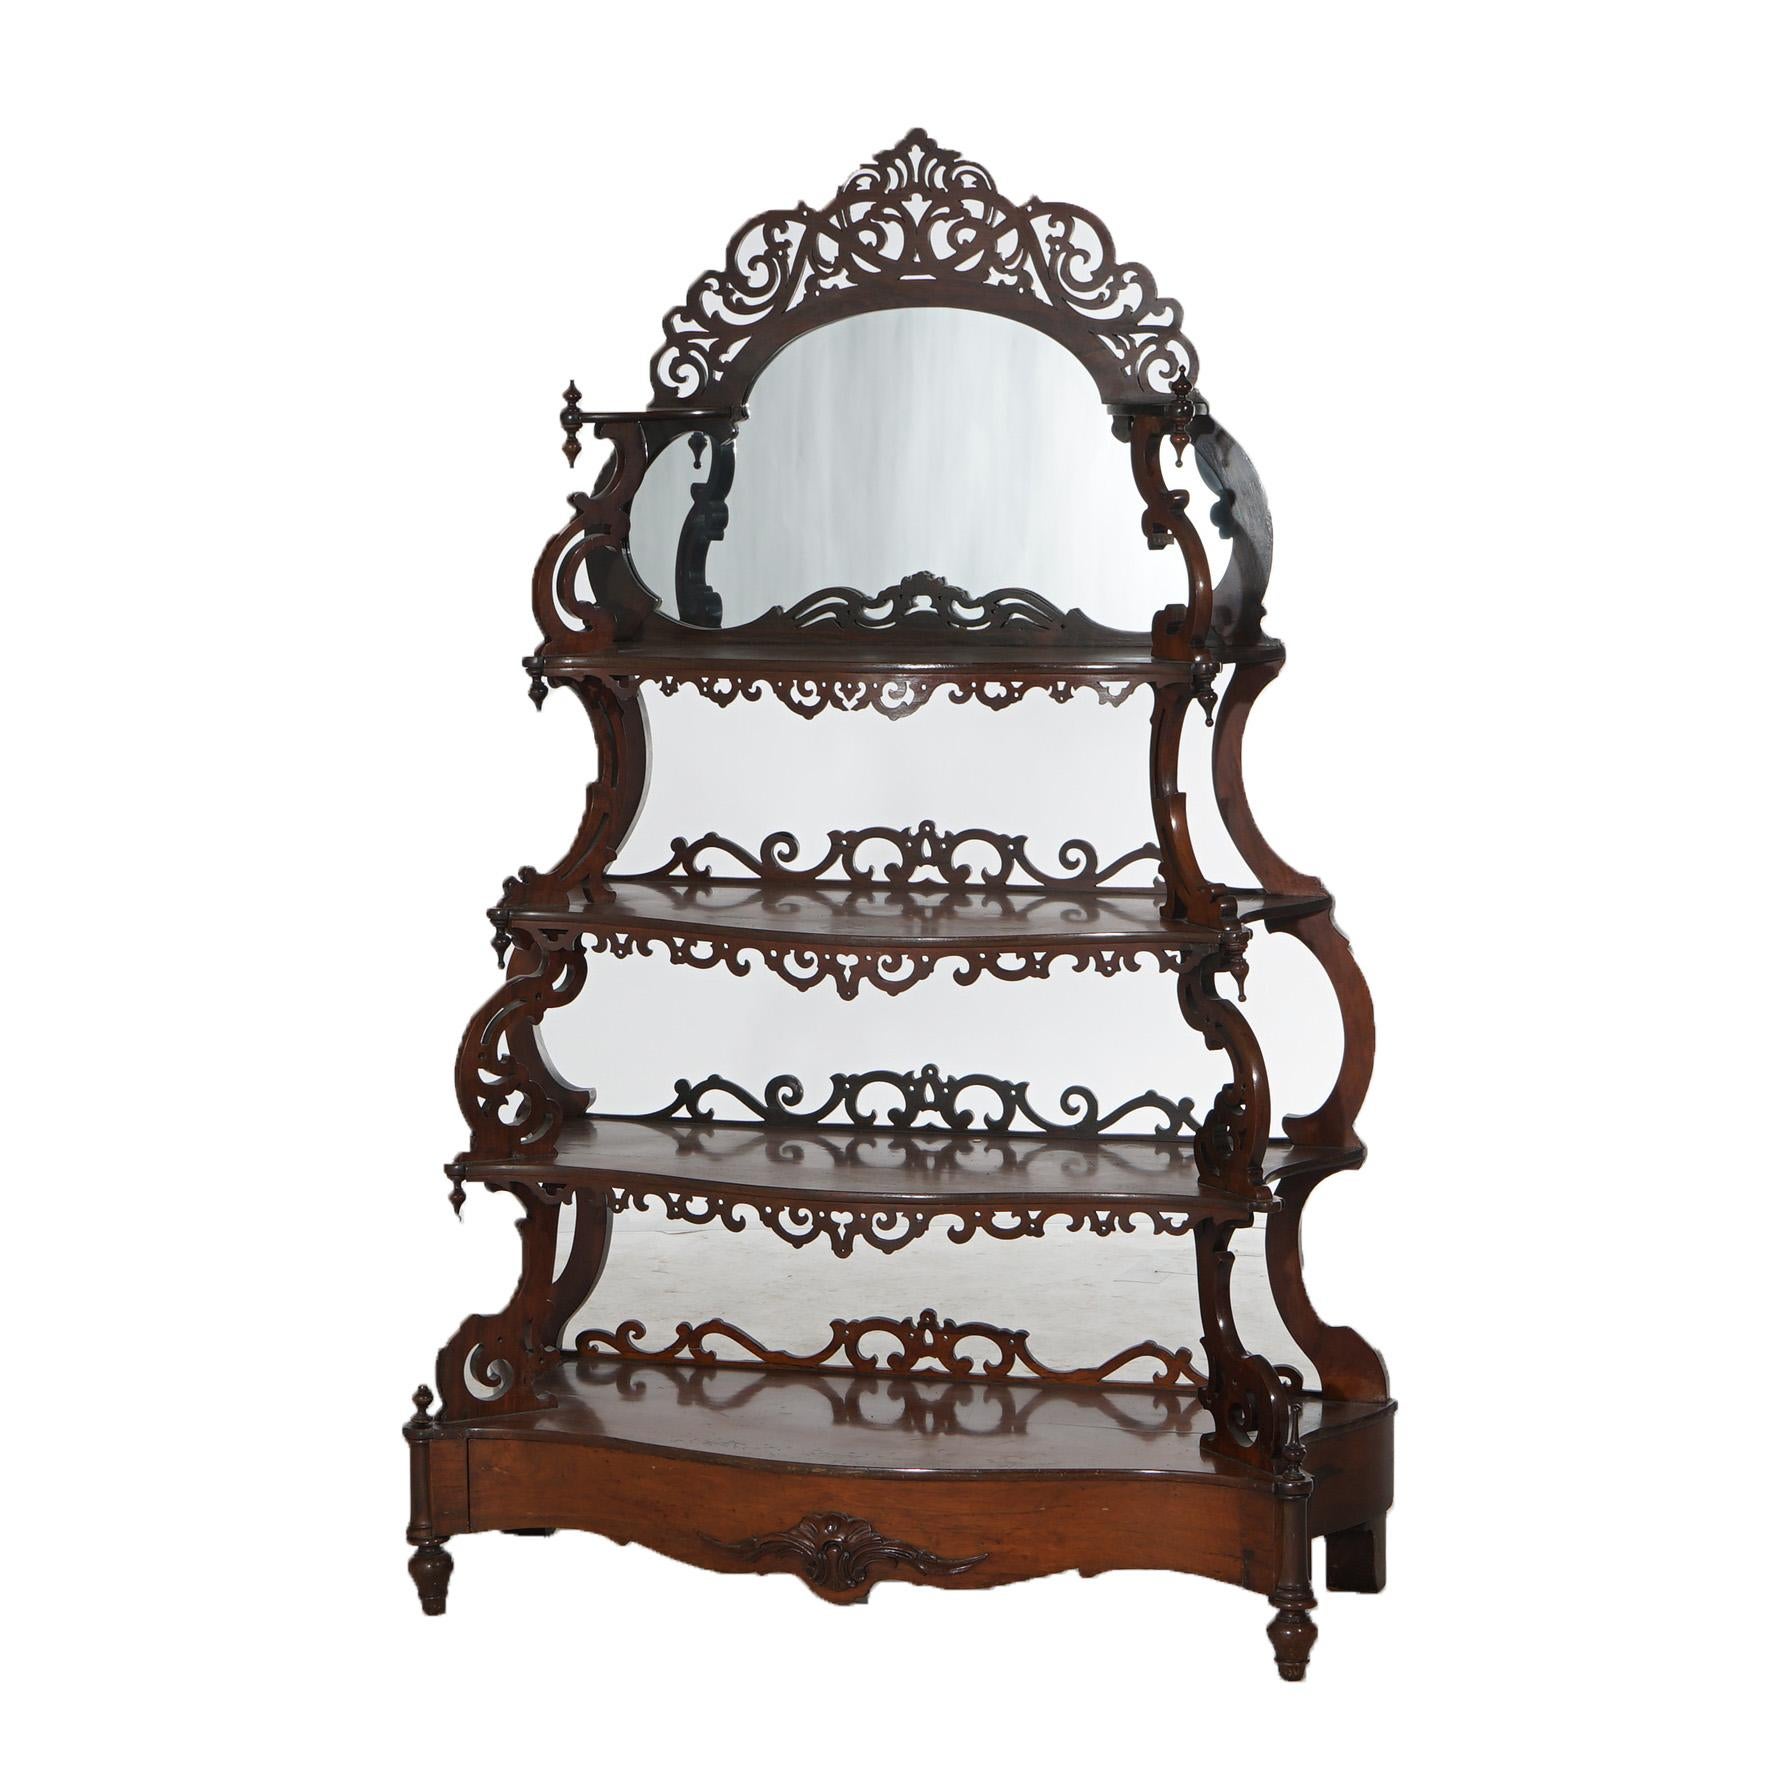 ***Ask About Reduced In-House Shipping Rates - Reliable Service & Fully Insured***
Antique Victorian Rococo Carved Walnut Rosewood Mirrored Etagere with Graduated Shelving and Carved Scroll Elements c1880

Measures - 66